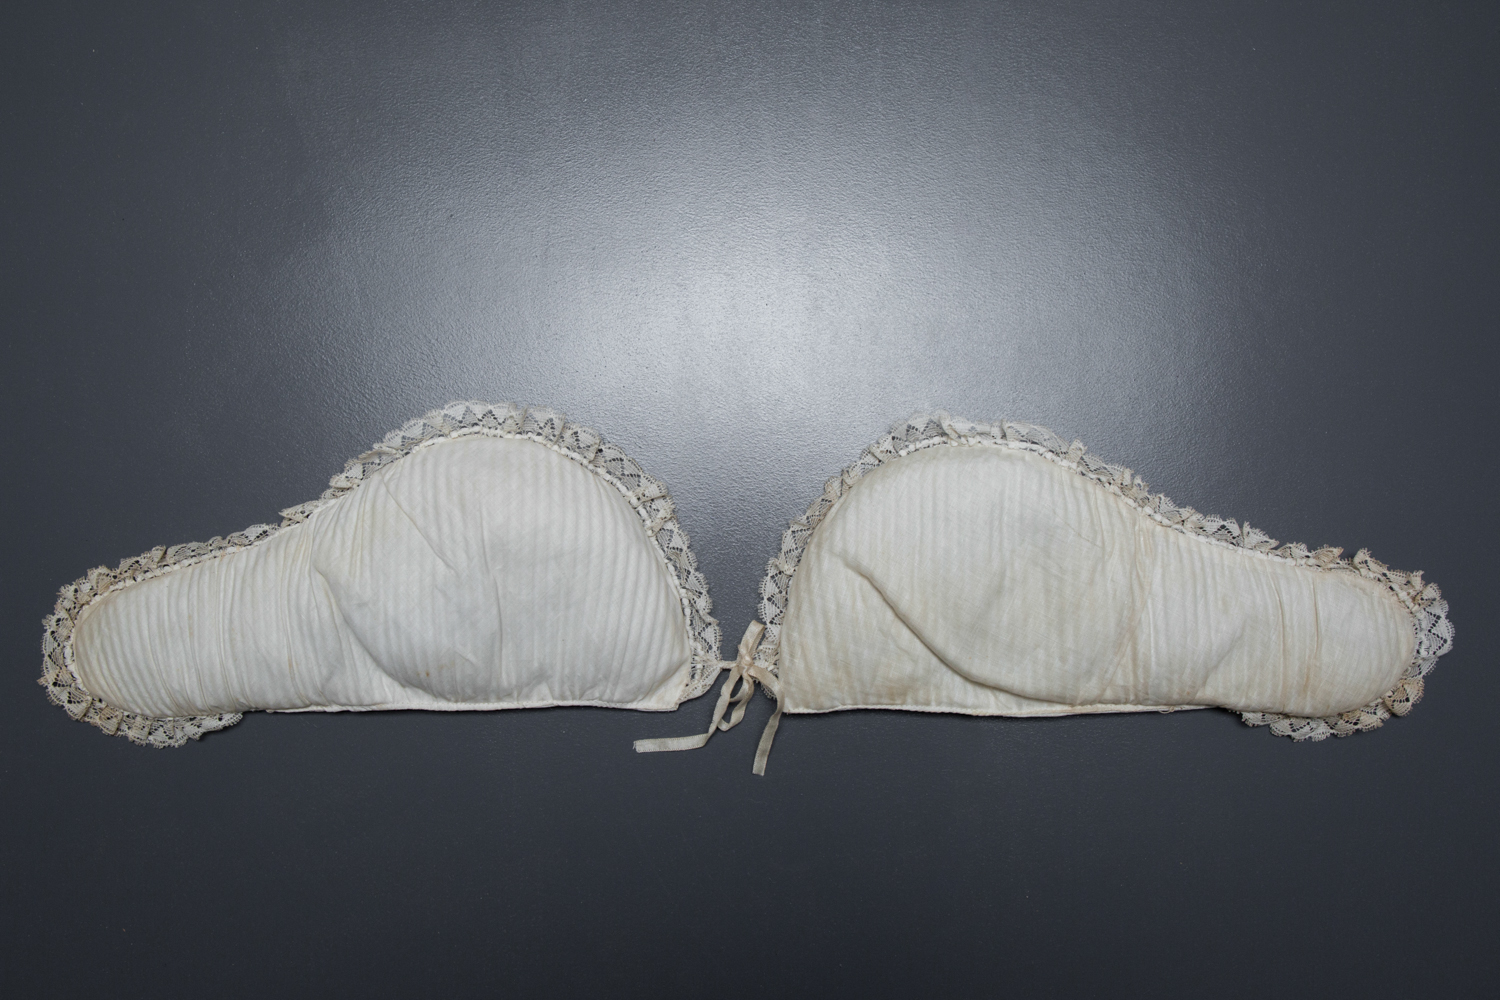 Cotton Padded Bust Improver With Lace Trim, c. 1880-1900s. The Underpinnings Museum. Photography by Tigz Rice.